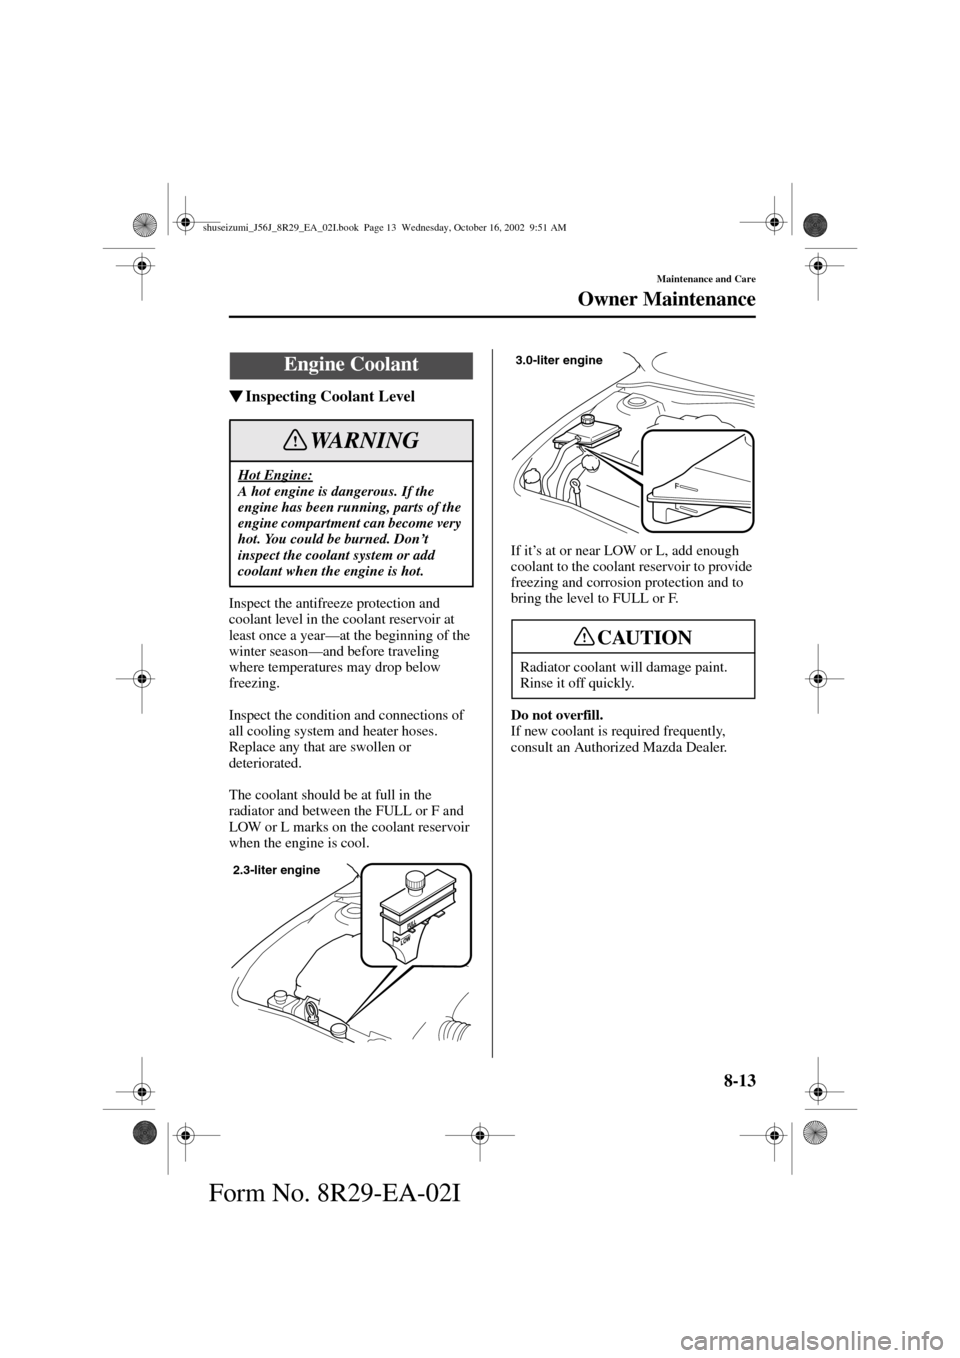 MAZDA MODEL 6 2003  Owners Manual (in English) 8-13
Maintenance and Care
Owner Maintenance
Form No. 8R29-EA-02I
Inspecting Coolant Level
Inspect the antifreeze protection and 
coolant level in the coolant reservoir at 
least once a year—at the 